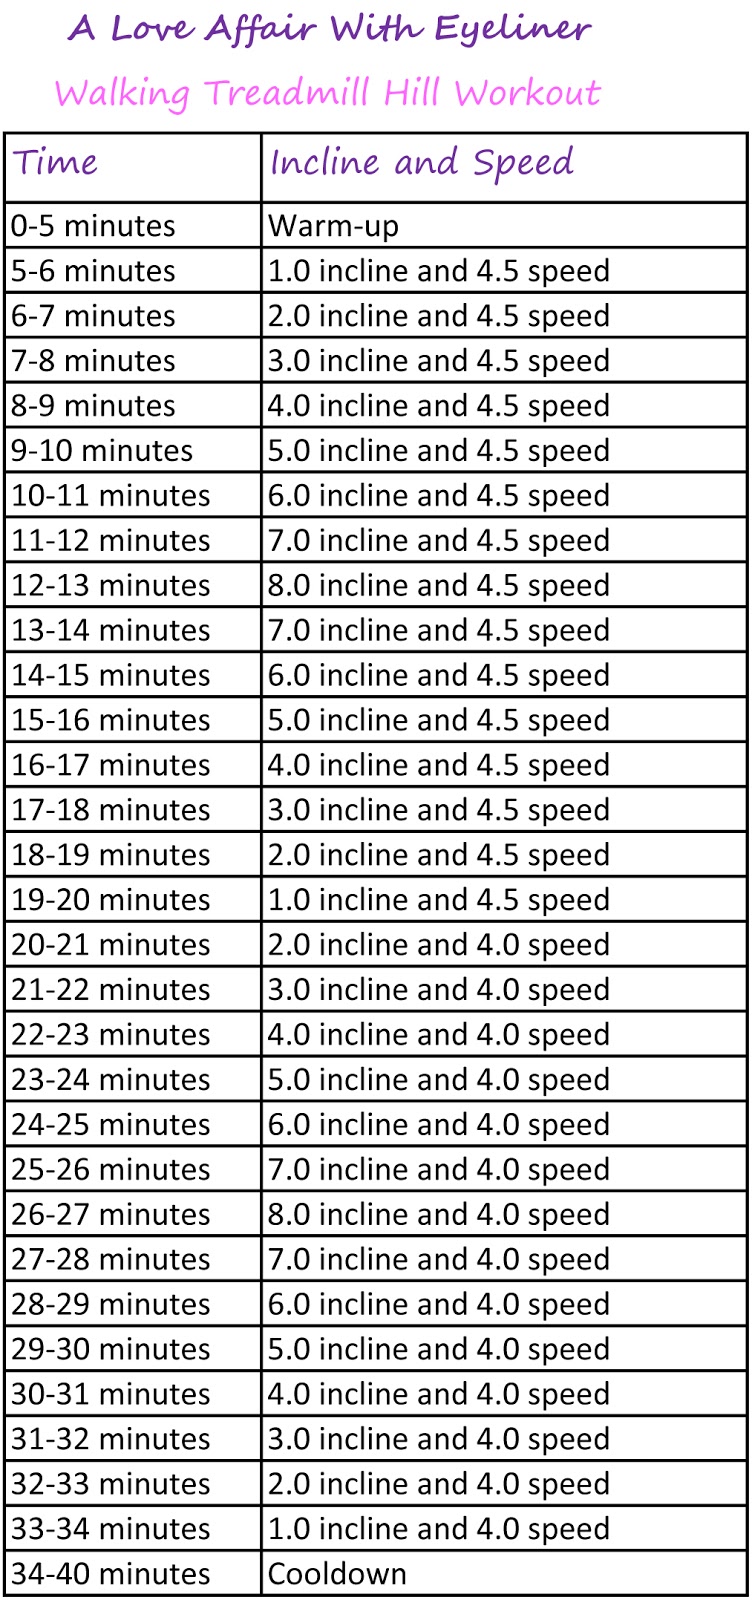 5 Day Treadmill Hill Workout for Burn Fat fast